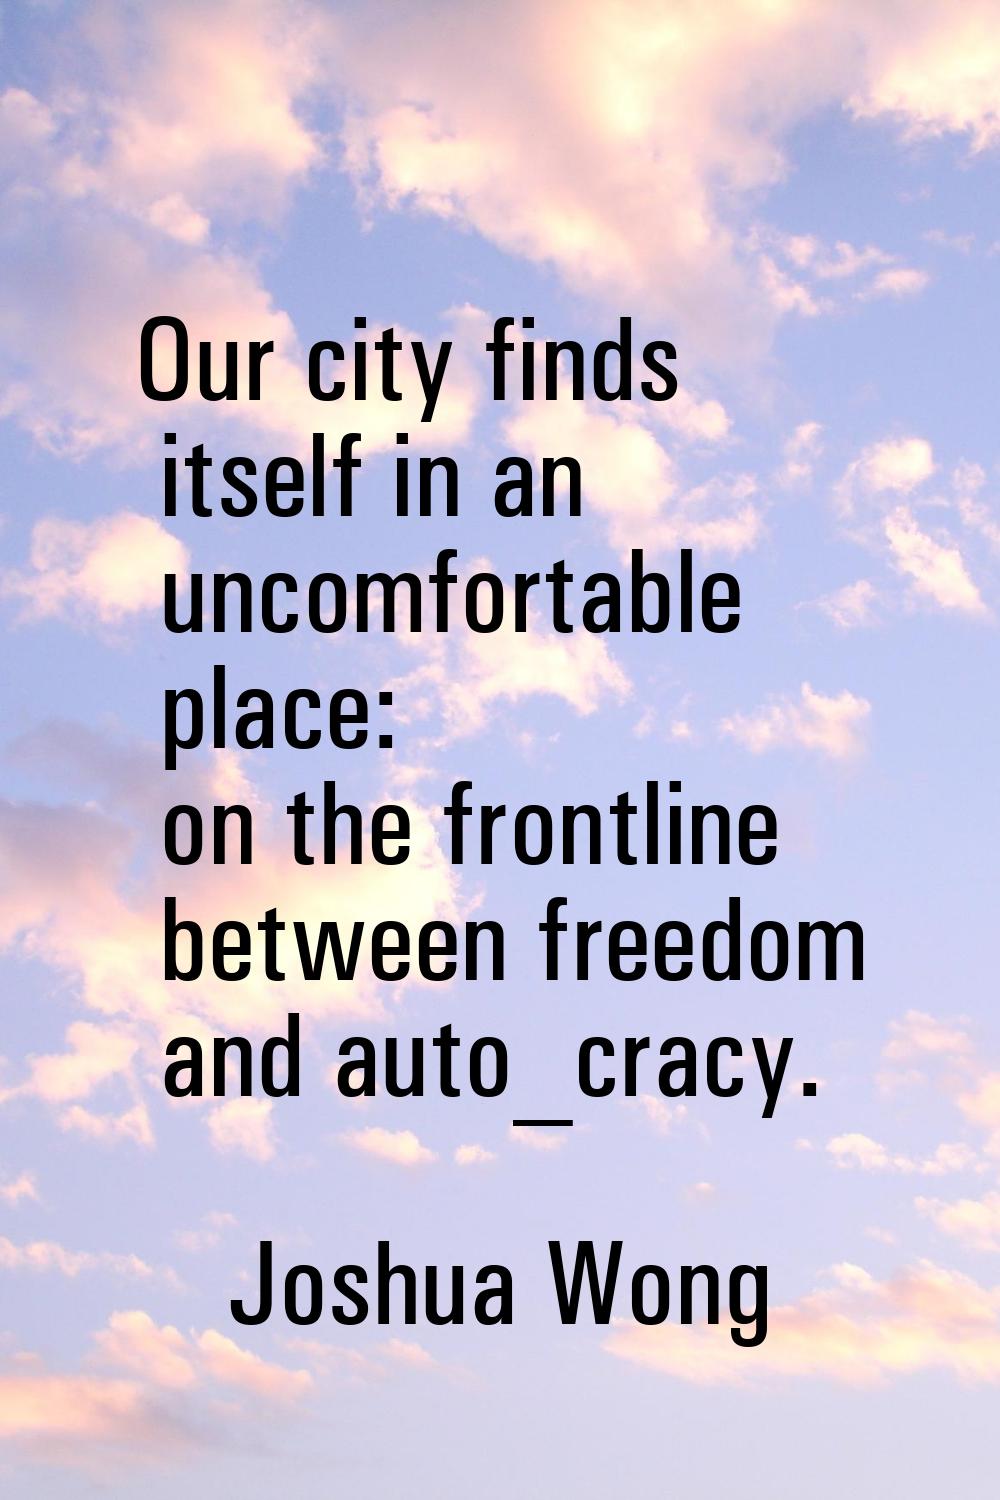 Our city finds itself in an uncomfortable place: on the frontline between freedom and auto_cracy.